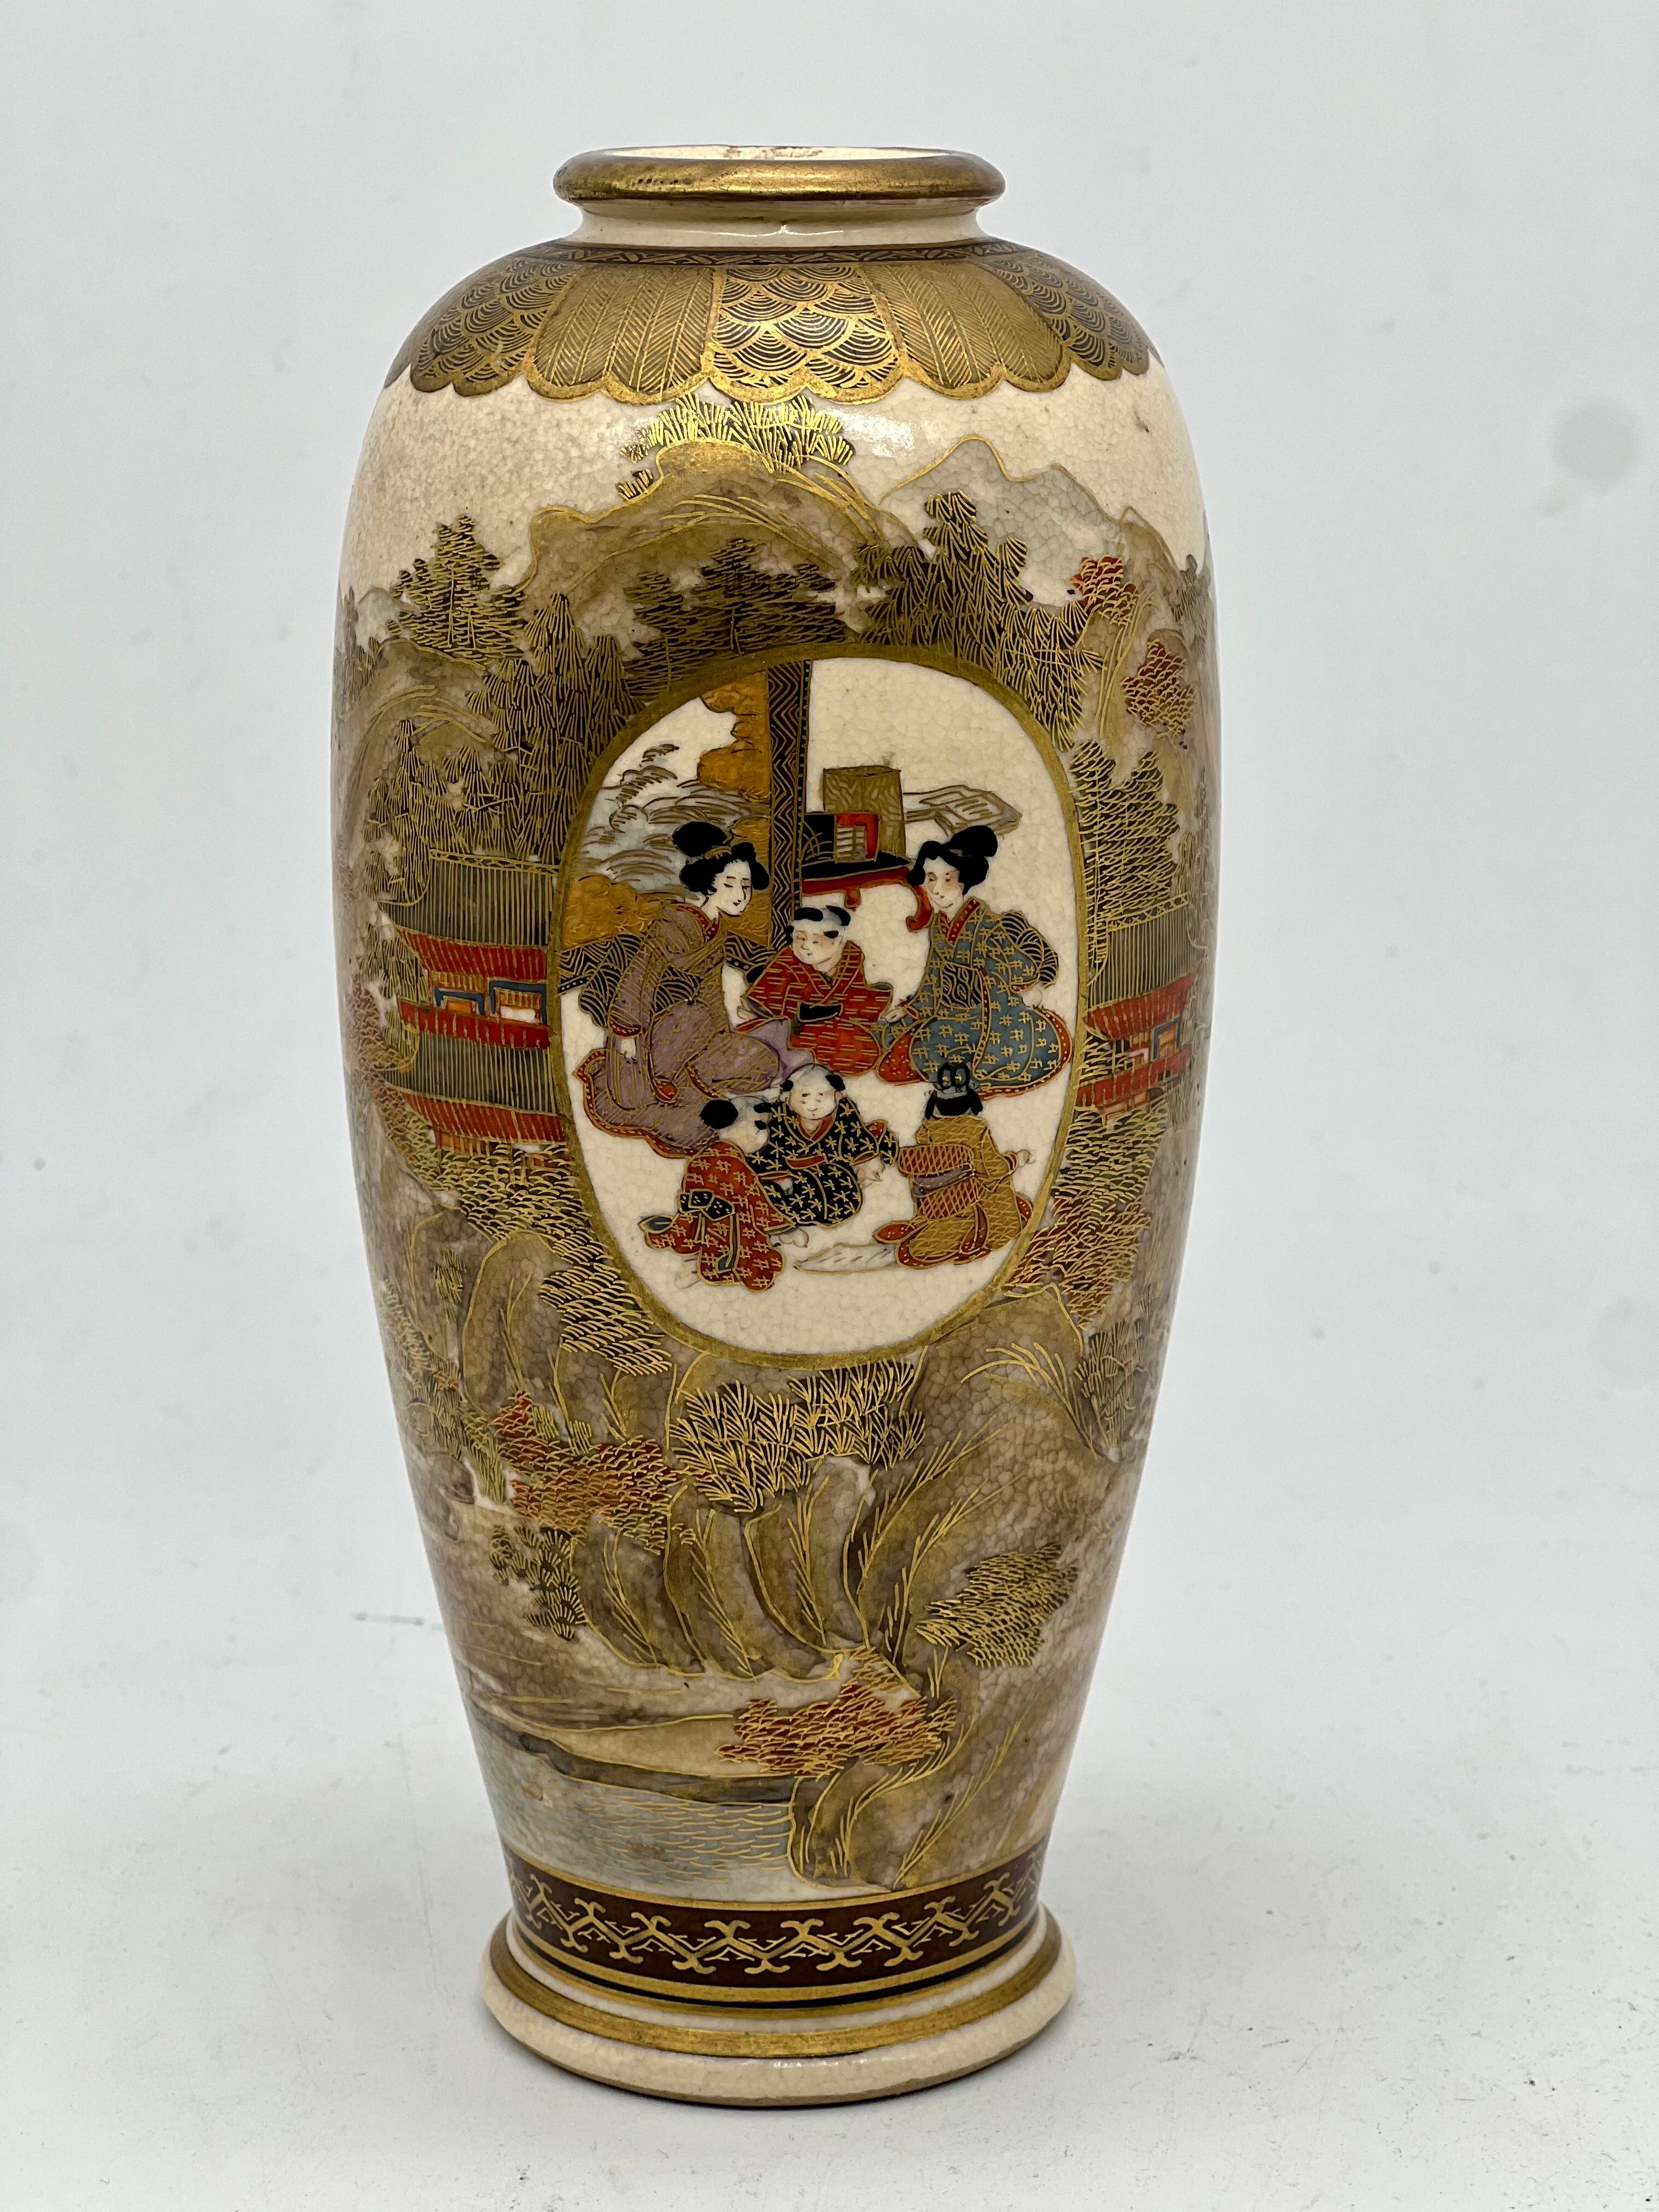 A Magnificent Japanese Satsuma Vase. Signed. Meiji period. For Sale 2